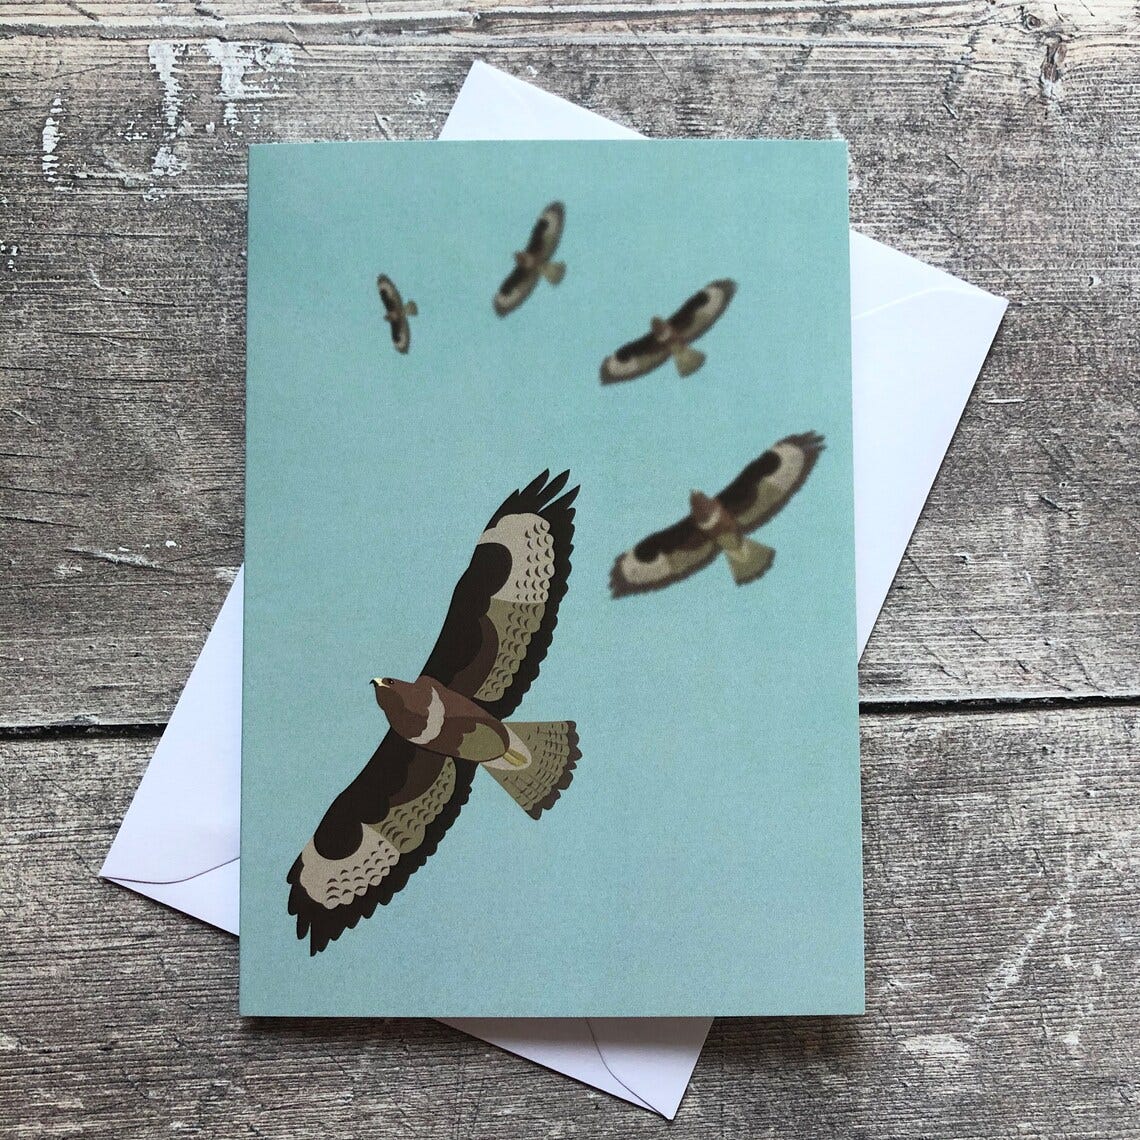 Greeting card with Buzzard design